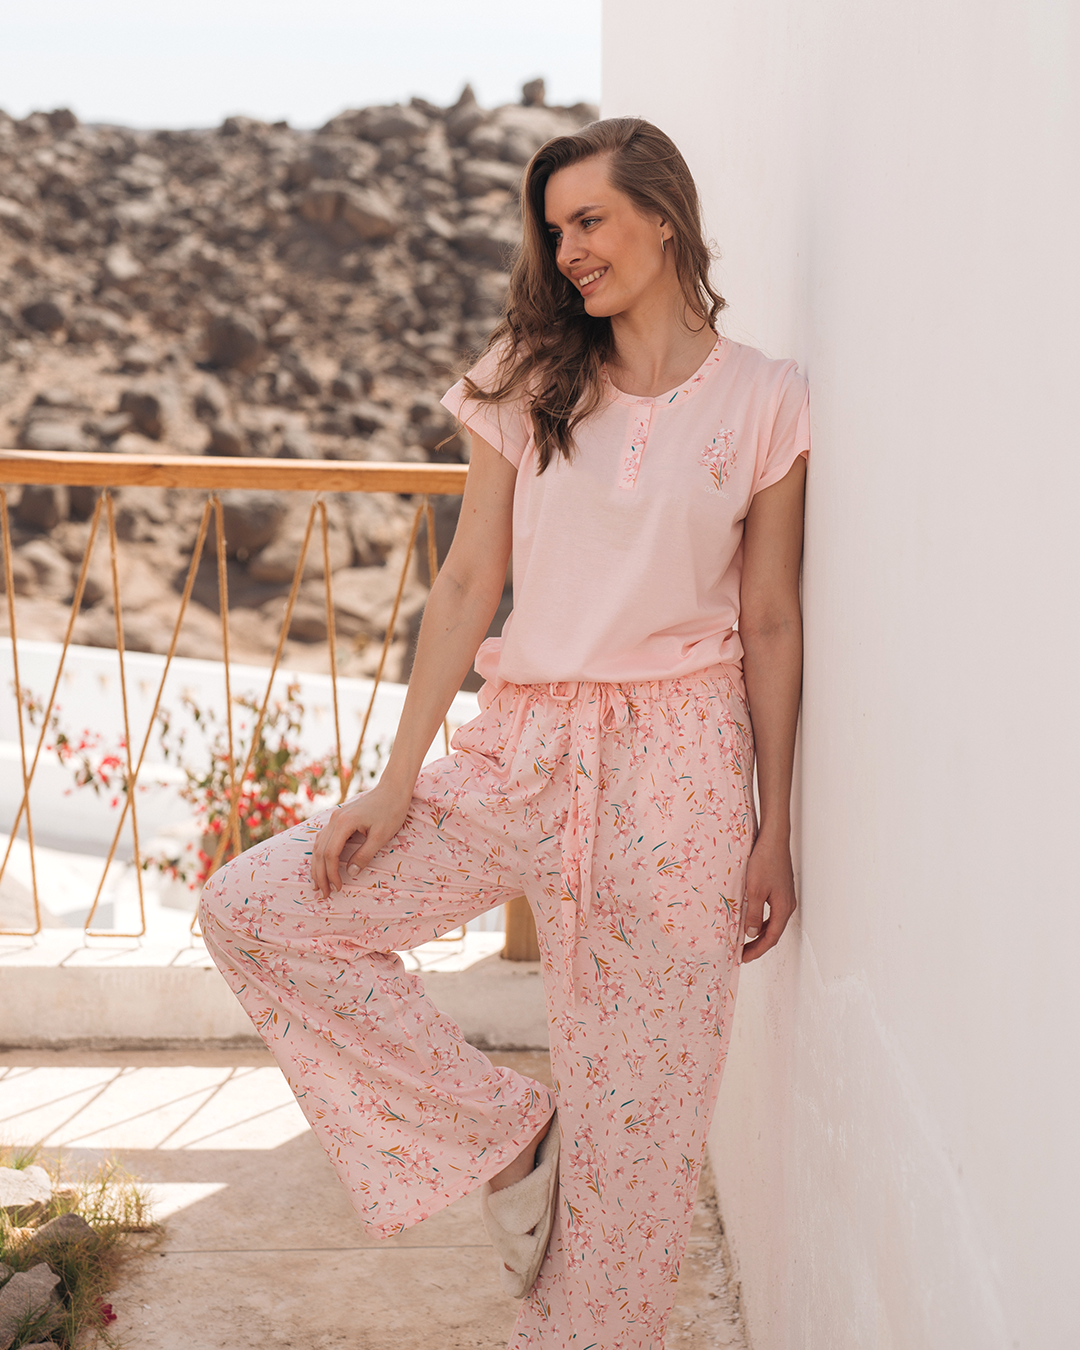 Women's pajamas with floral printed modal pants